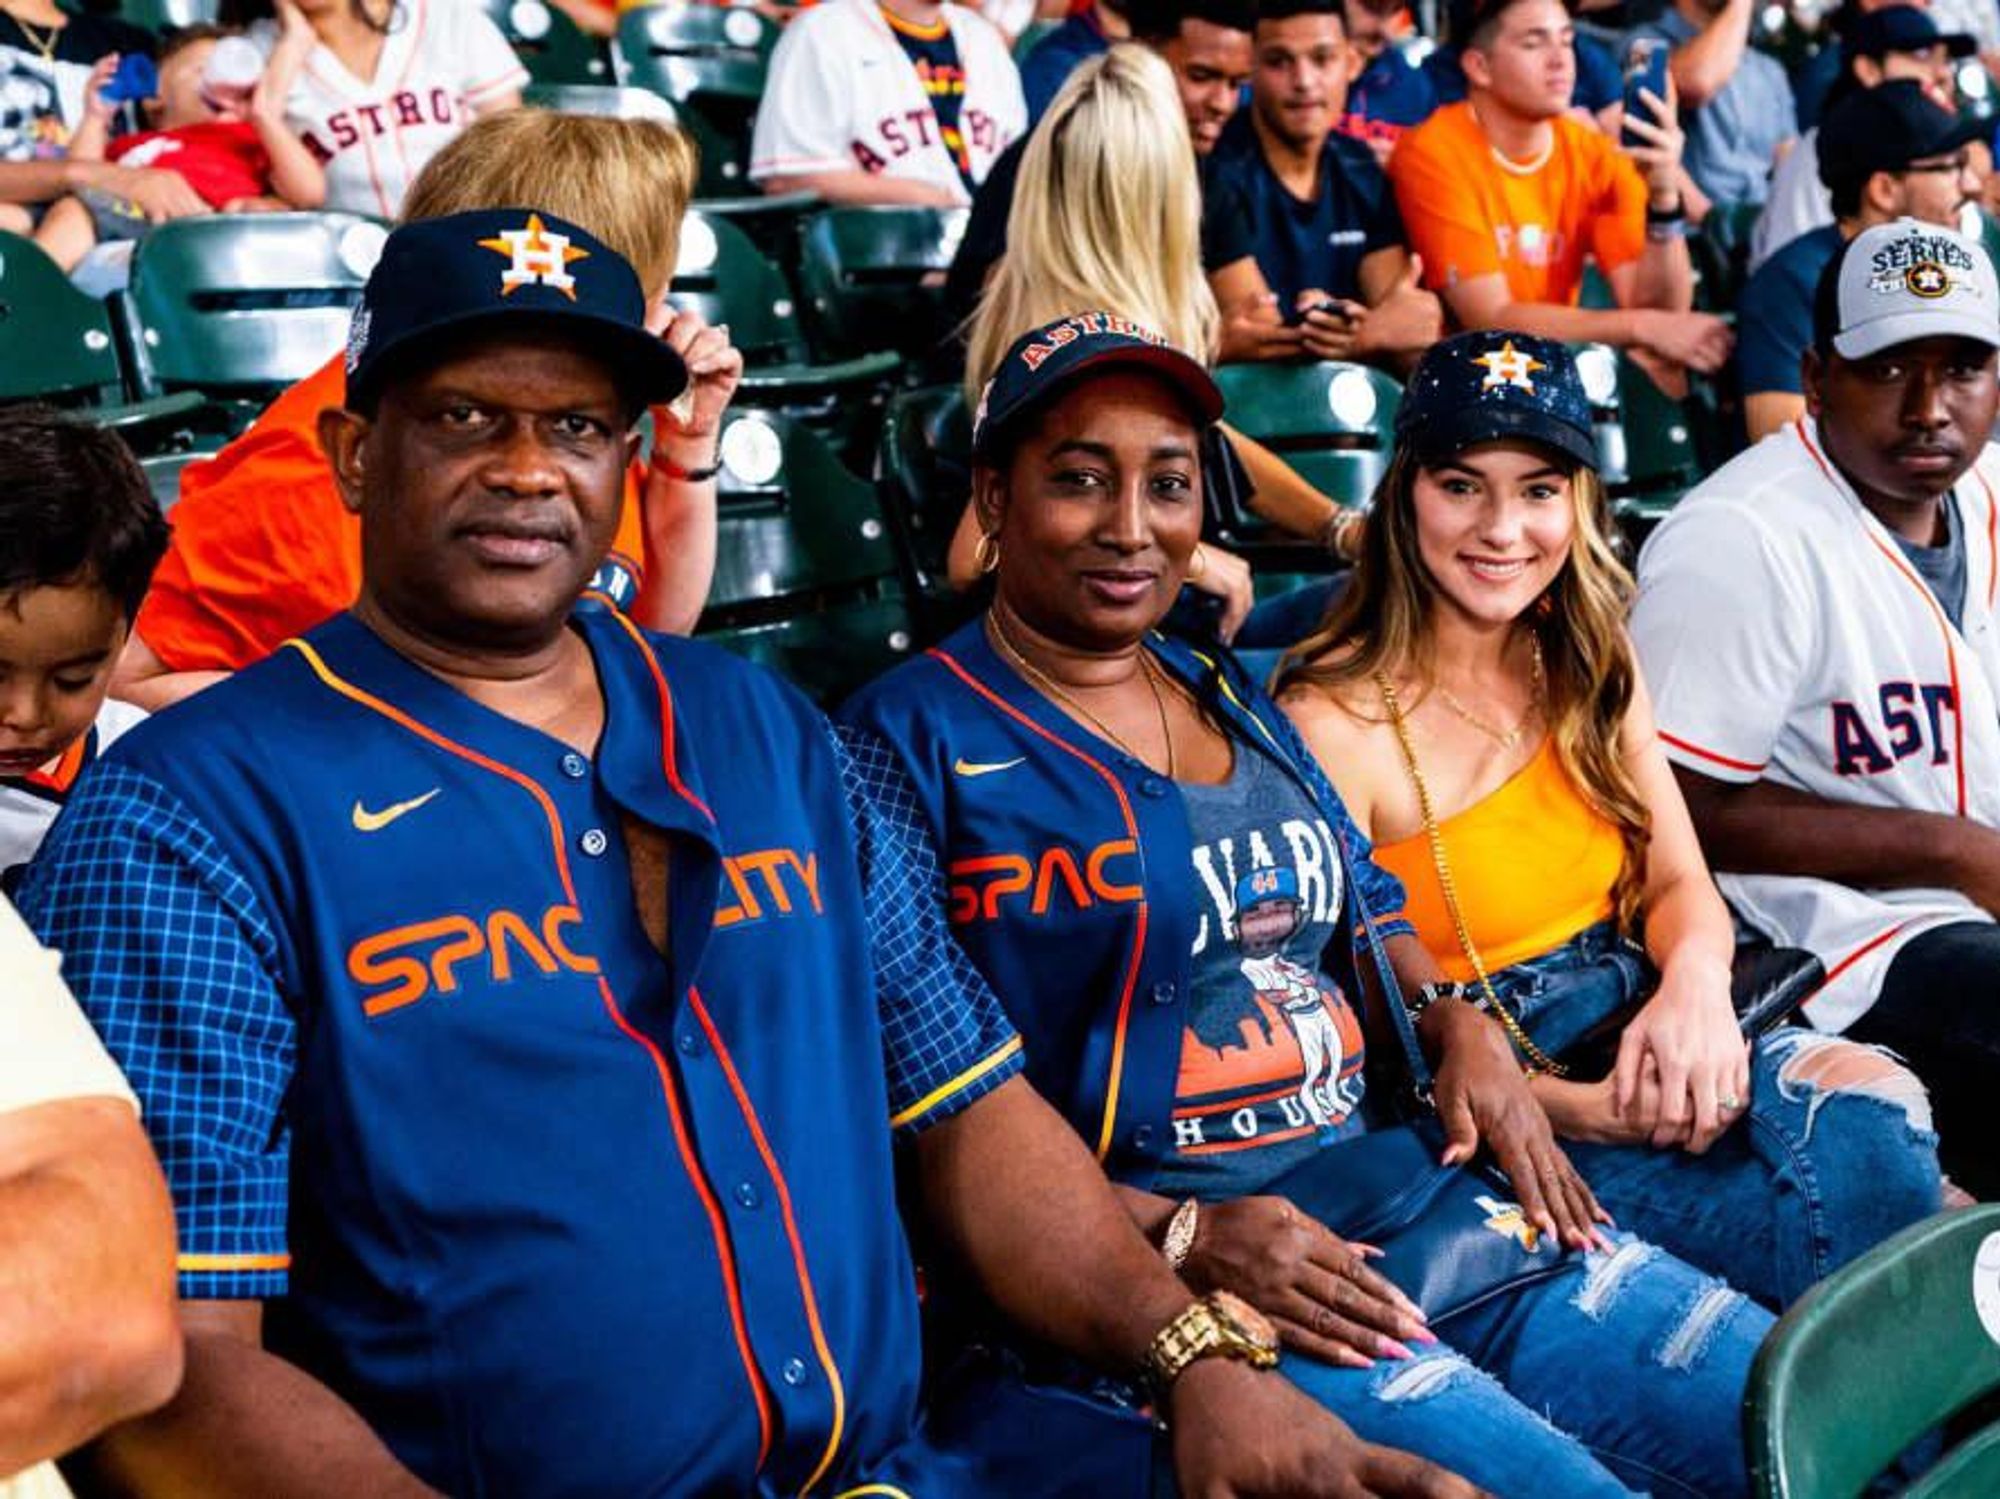 Woman at Academy said she has not watched Astros all year - ABC13 Houston